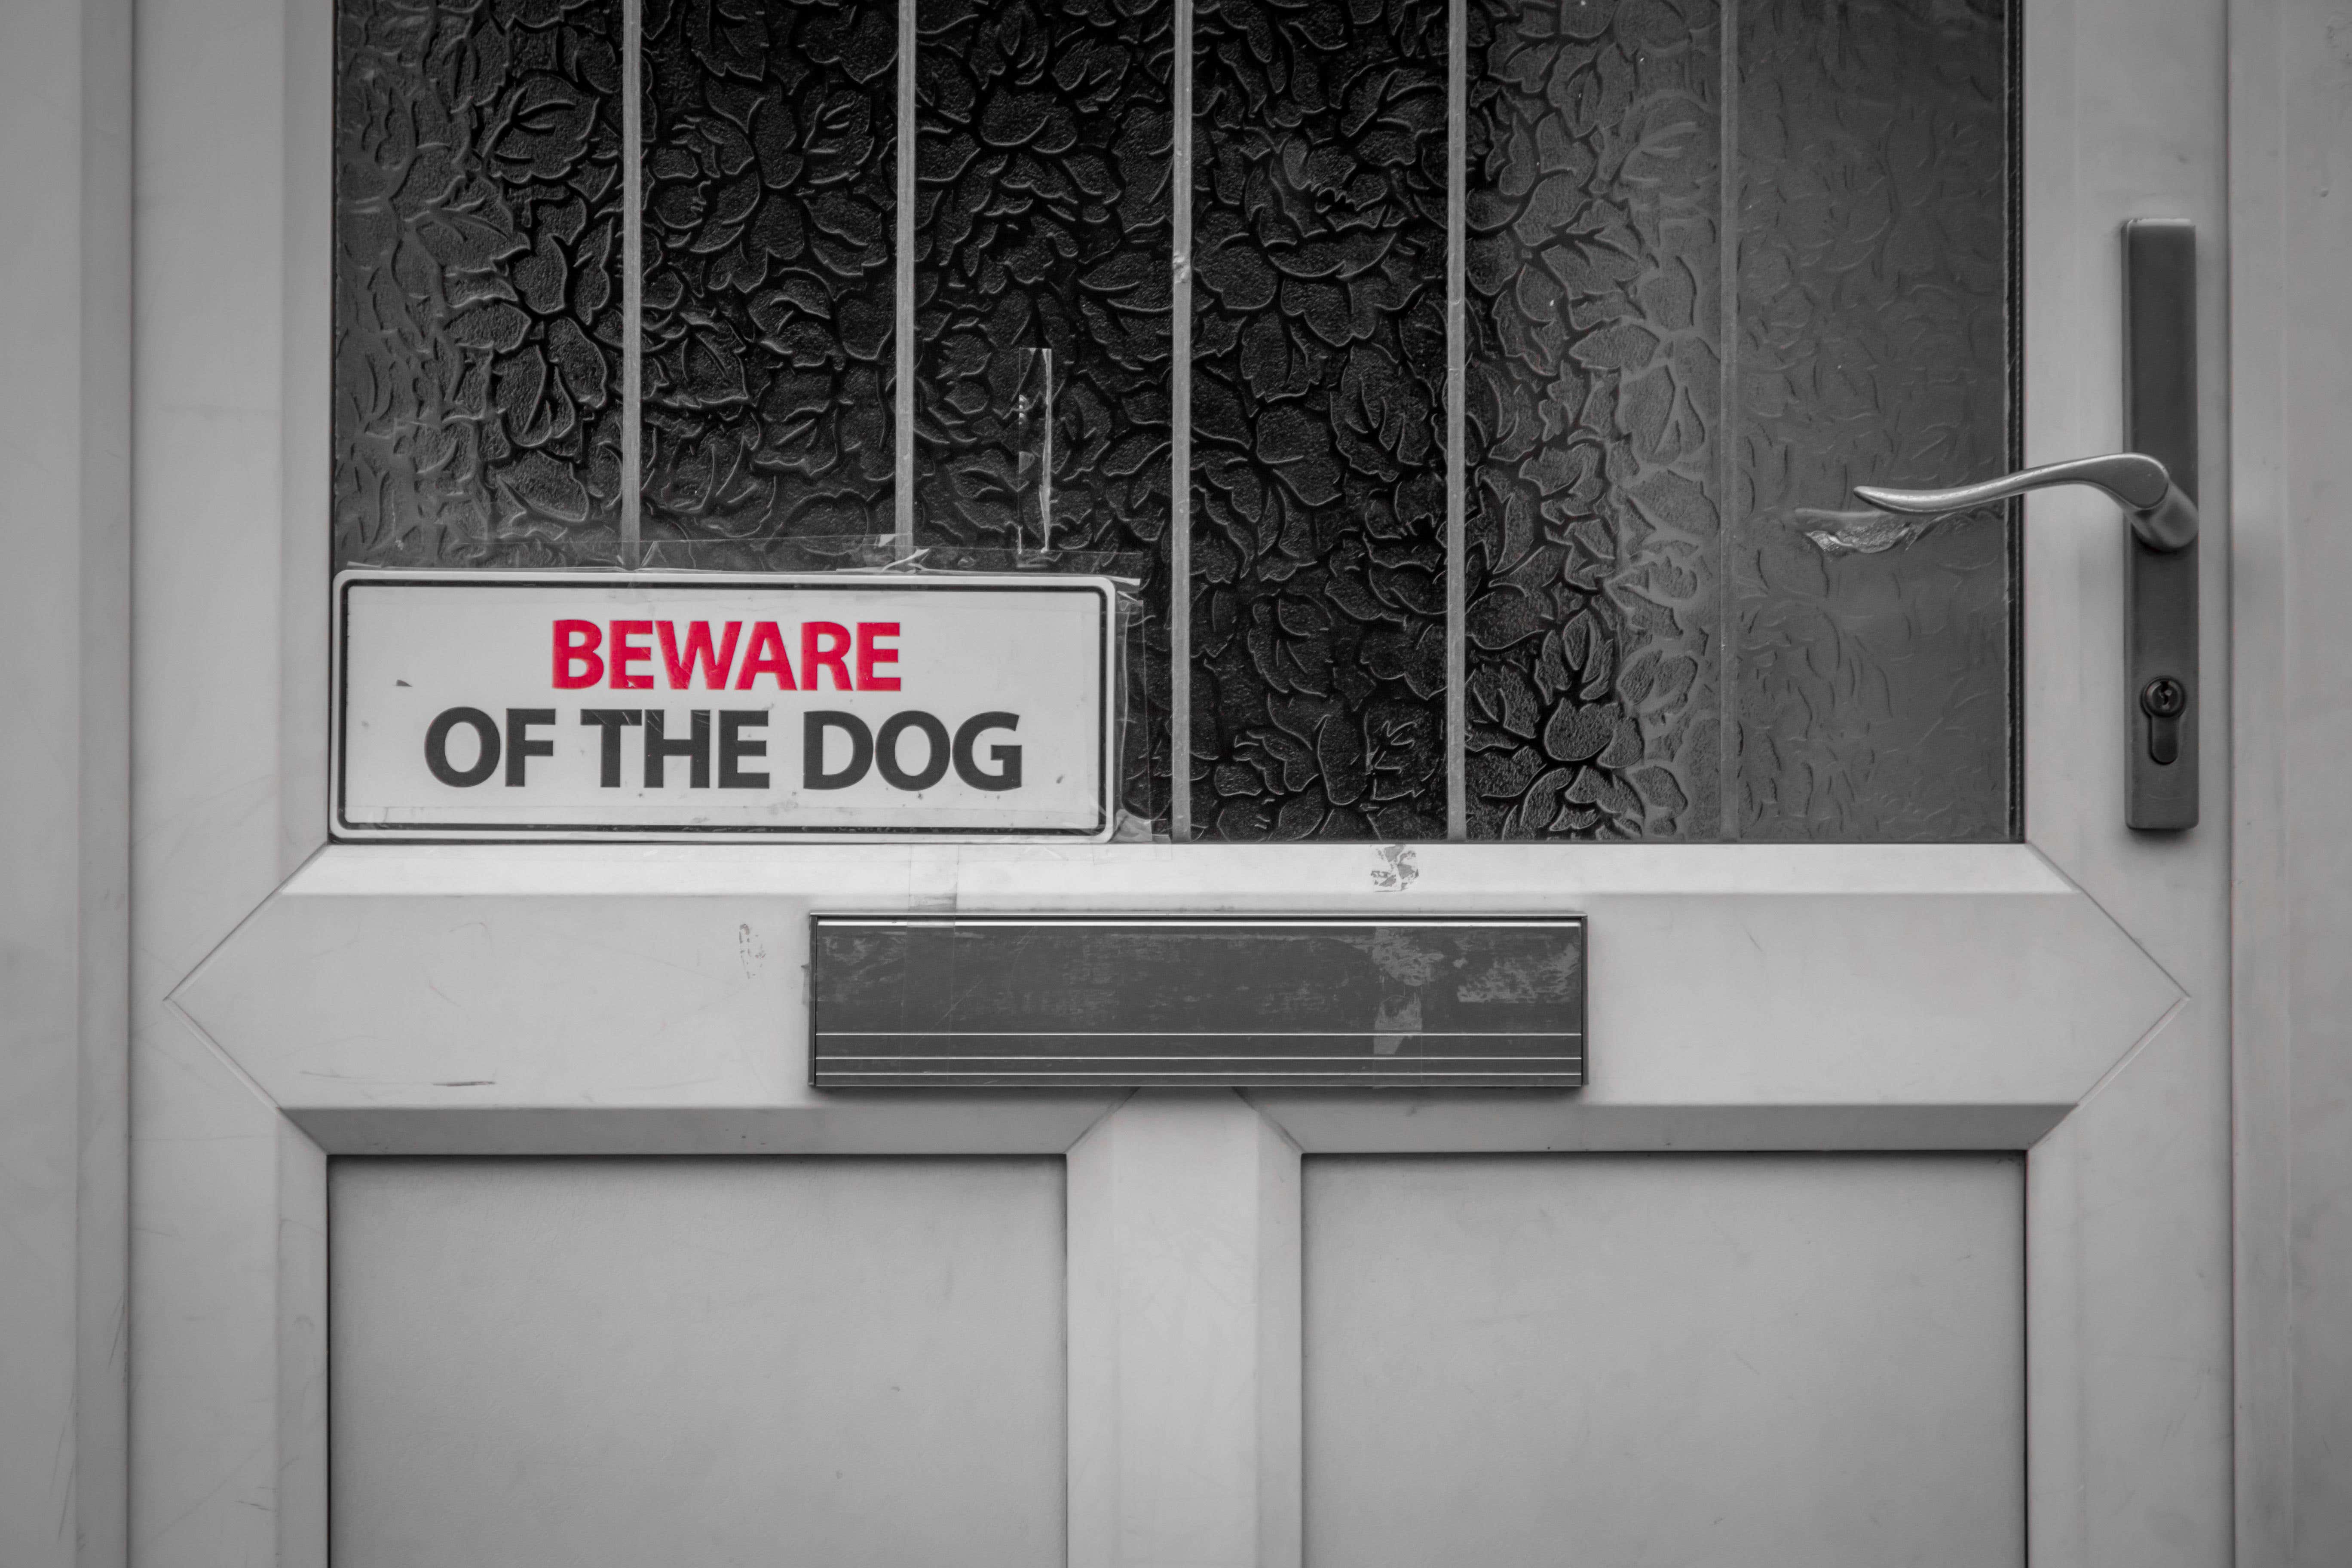 As well as home security measures, some 6% of respondents said they had bought a dog because they are worried about crime in their area, according to the party (Alamy/PA)